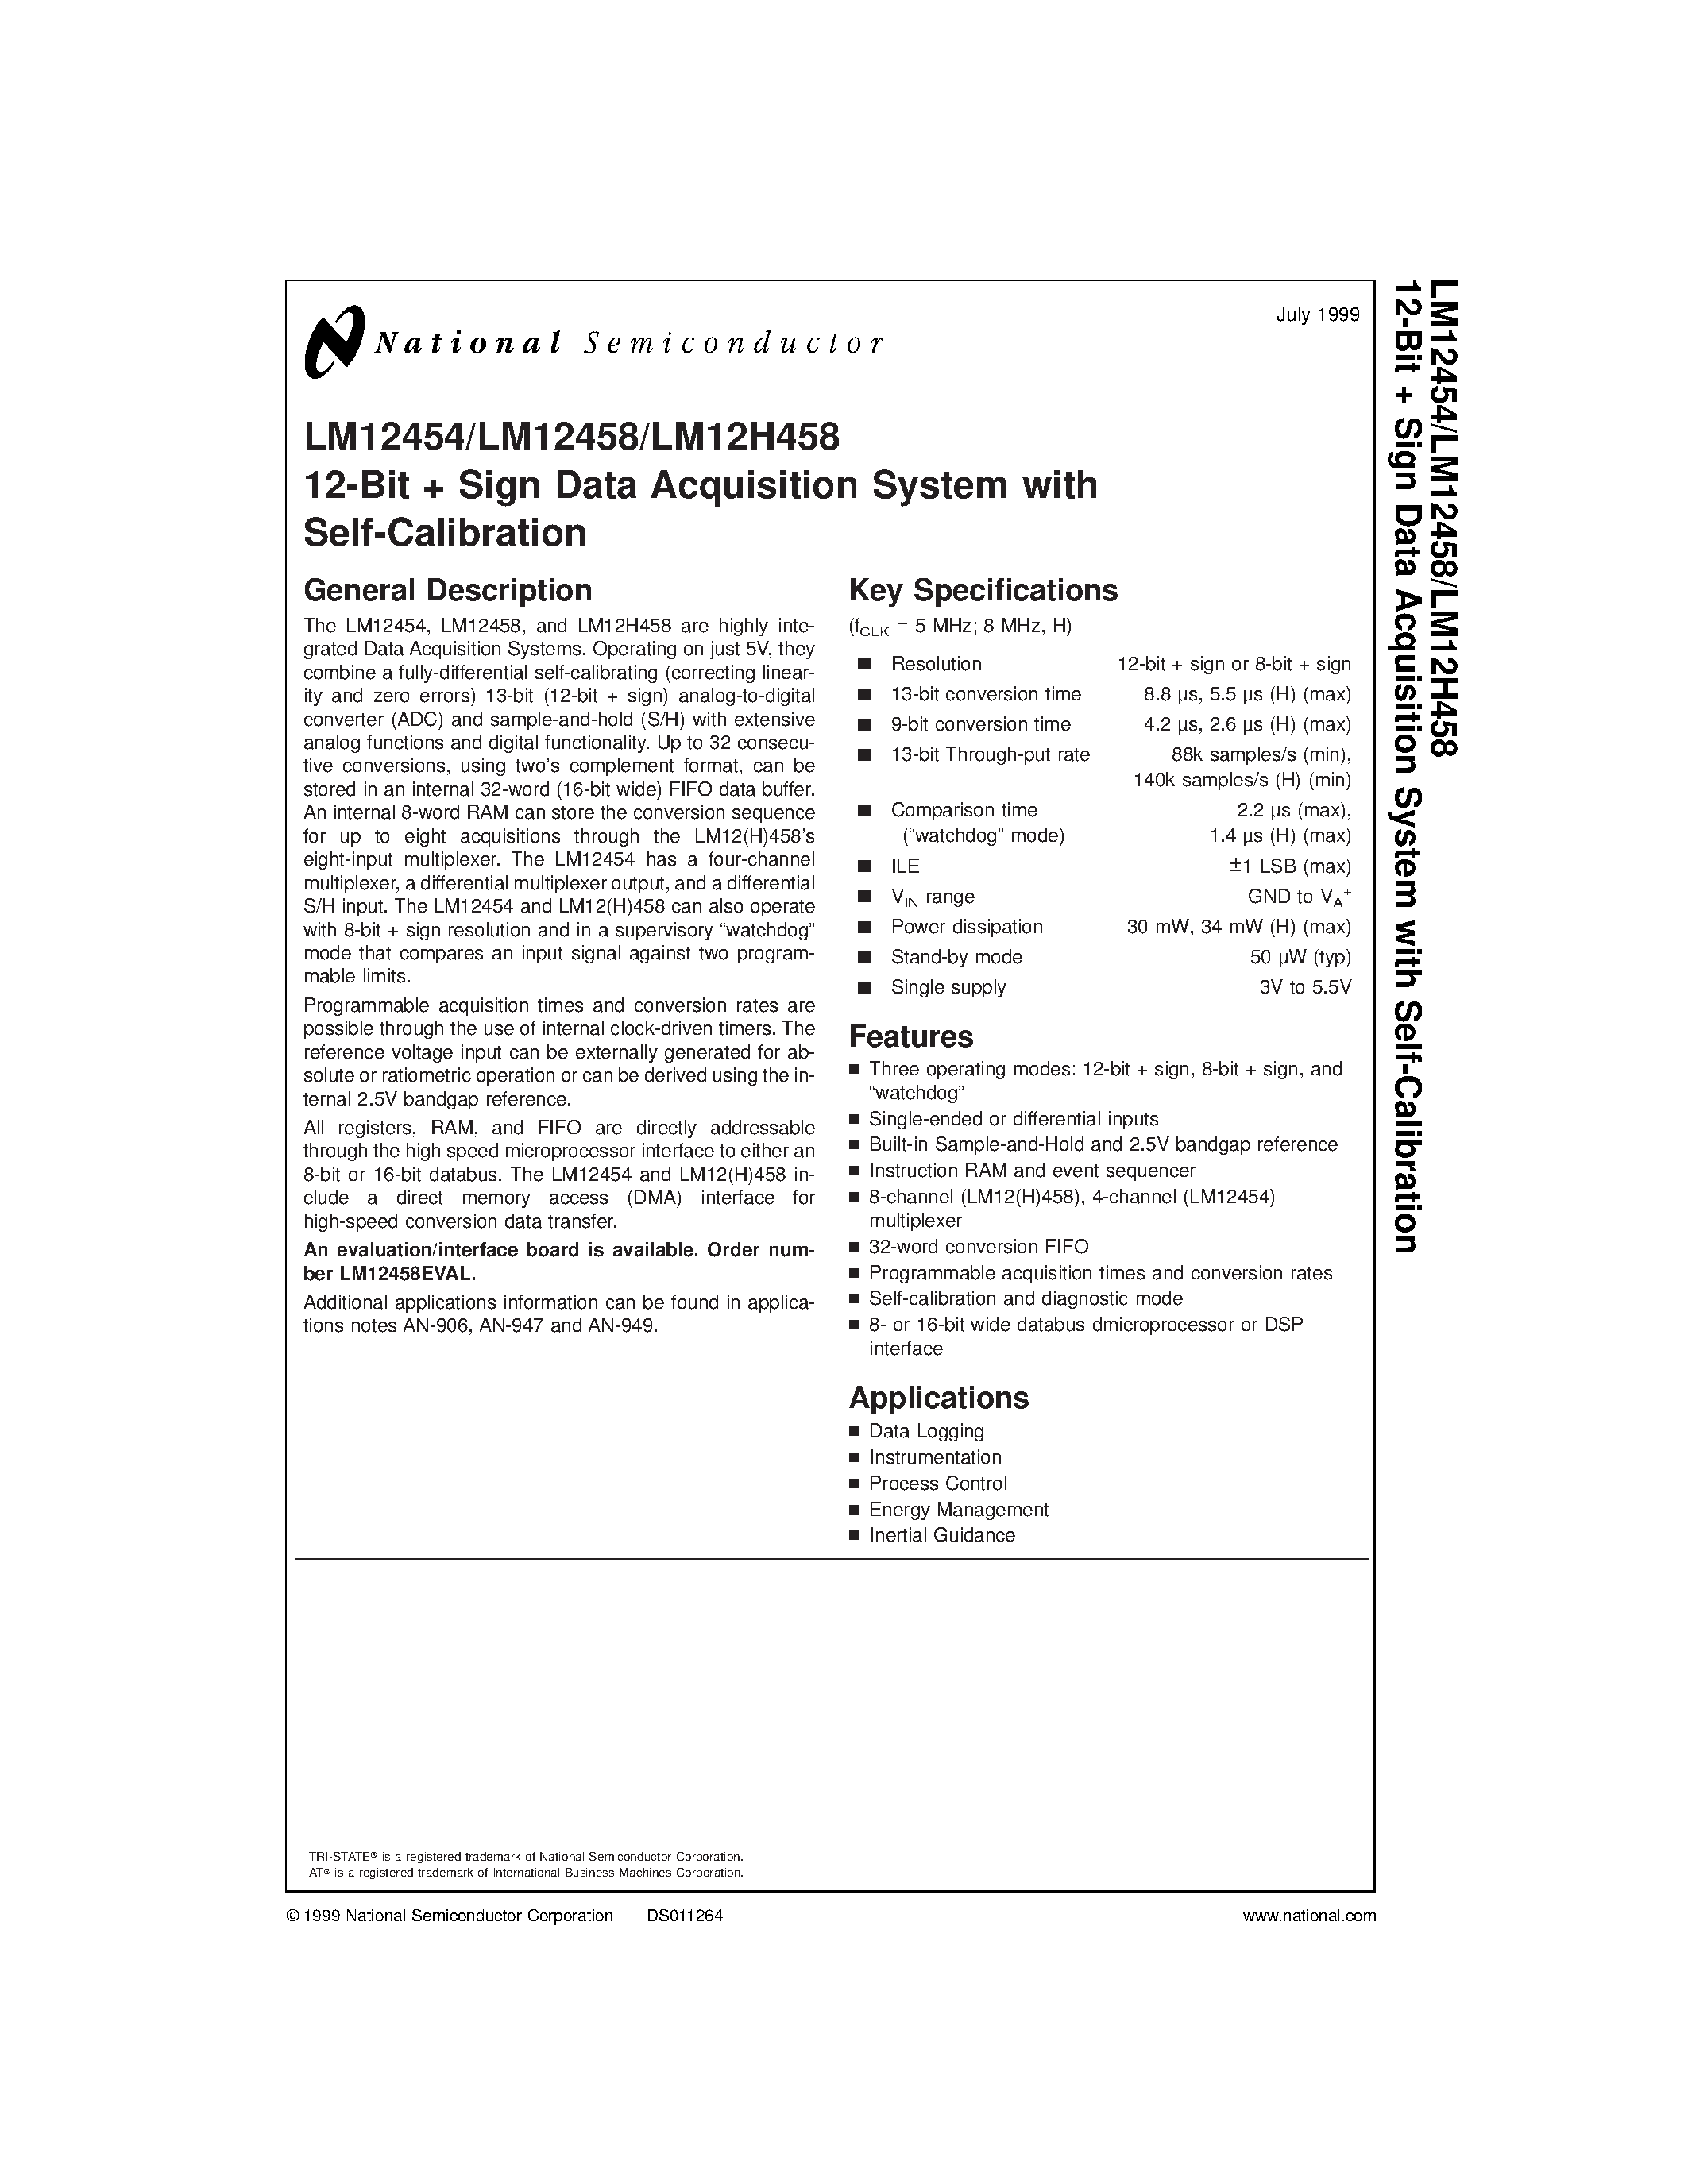 Datasheet 5962-9319502MYA - 12-Bit Sign Data Acquisition System with Self-Calibration page 1